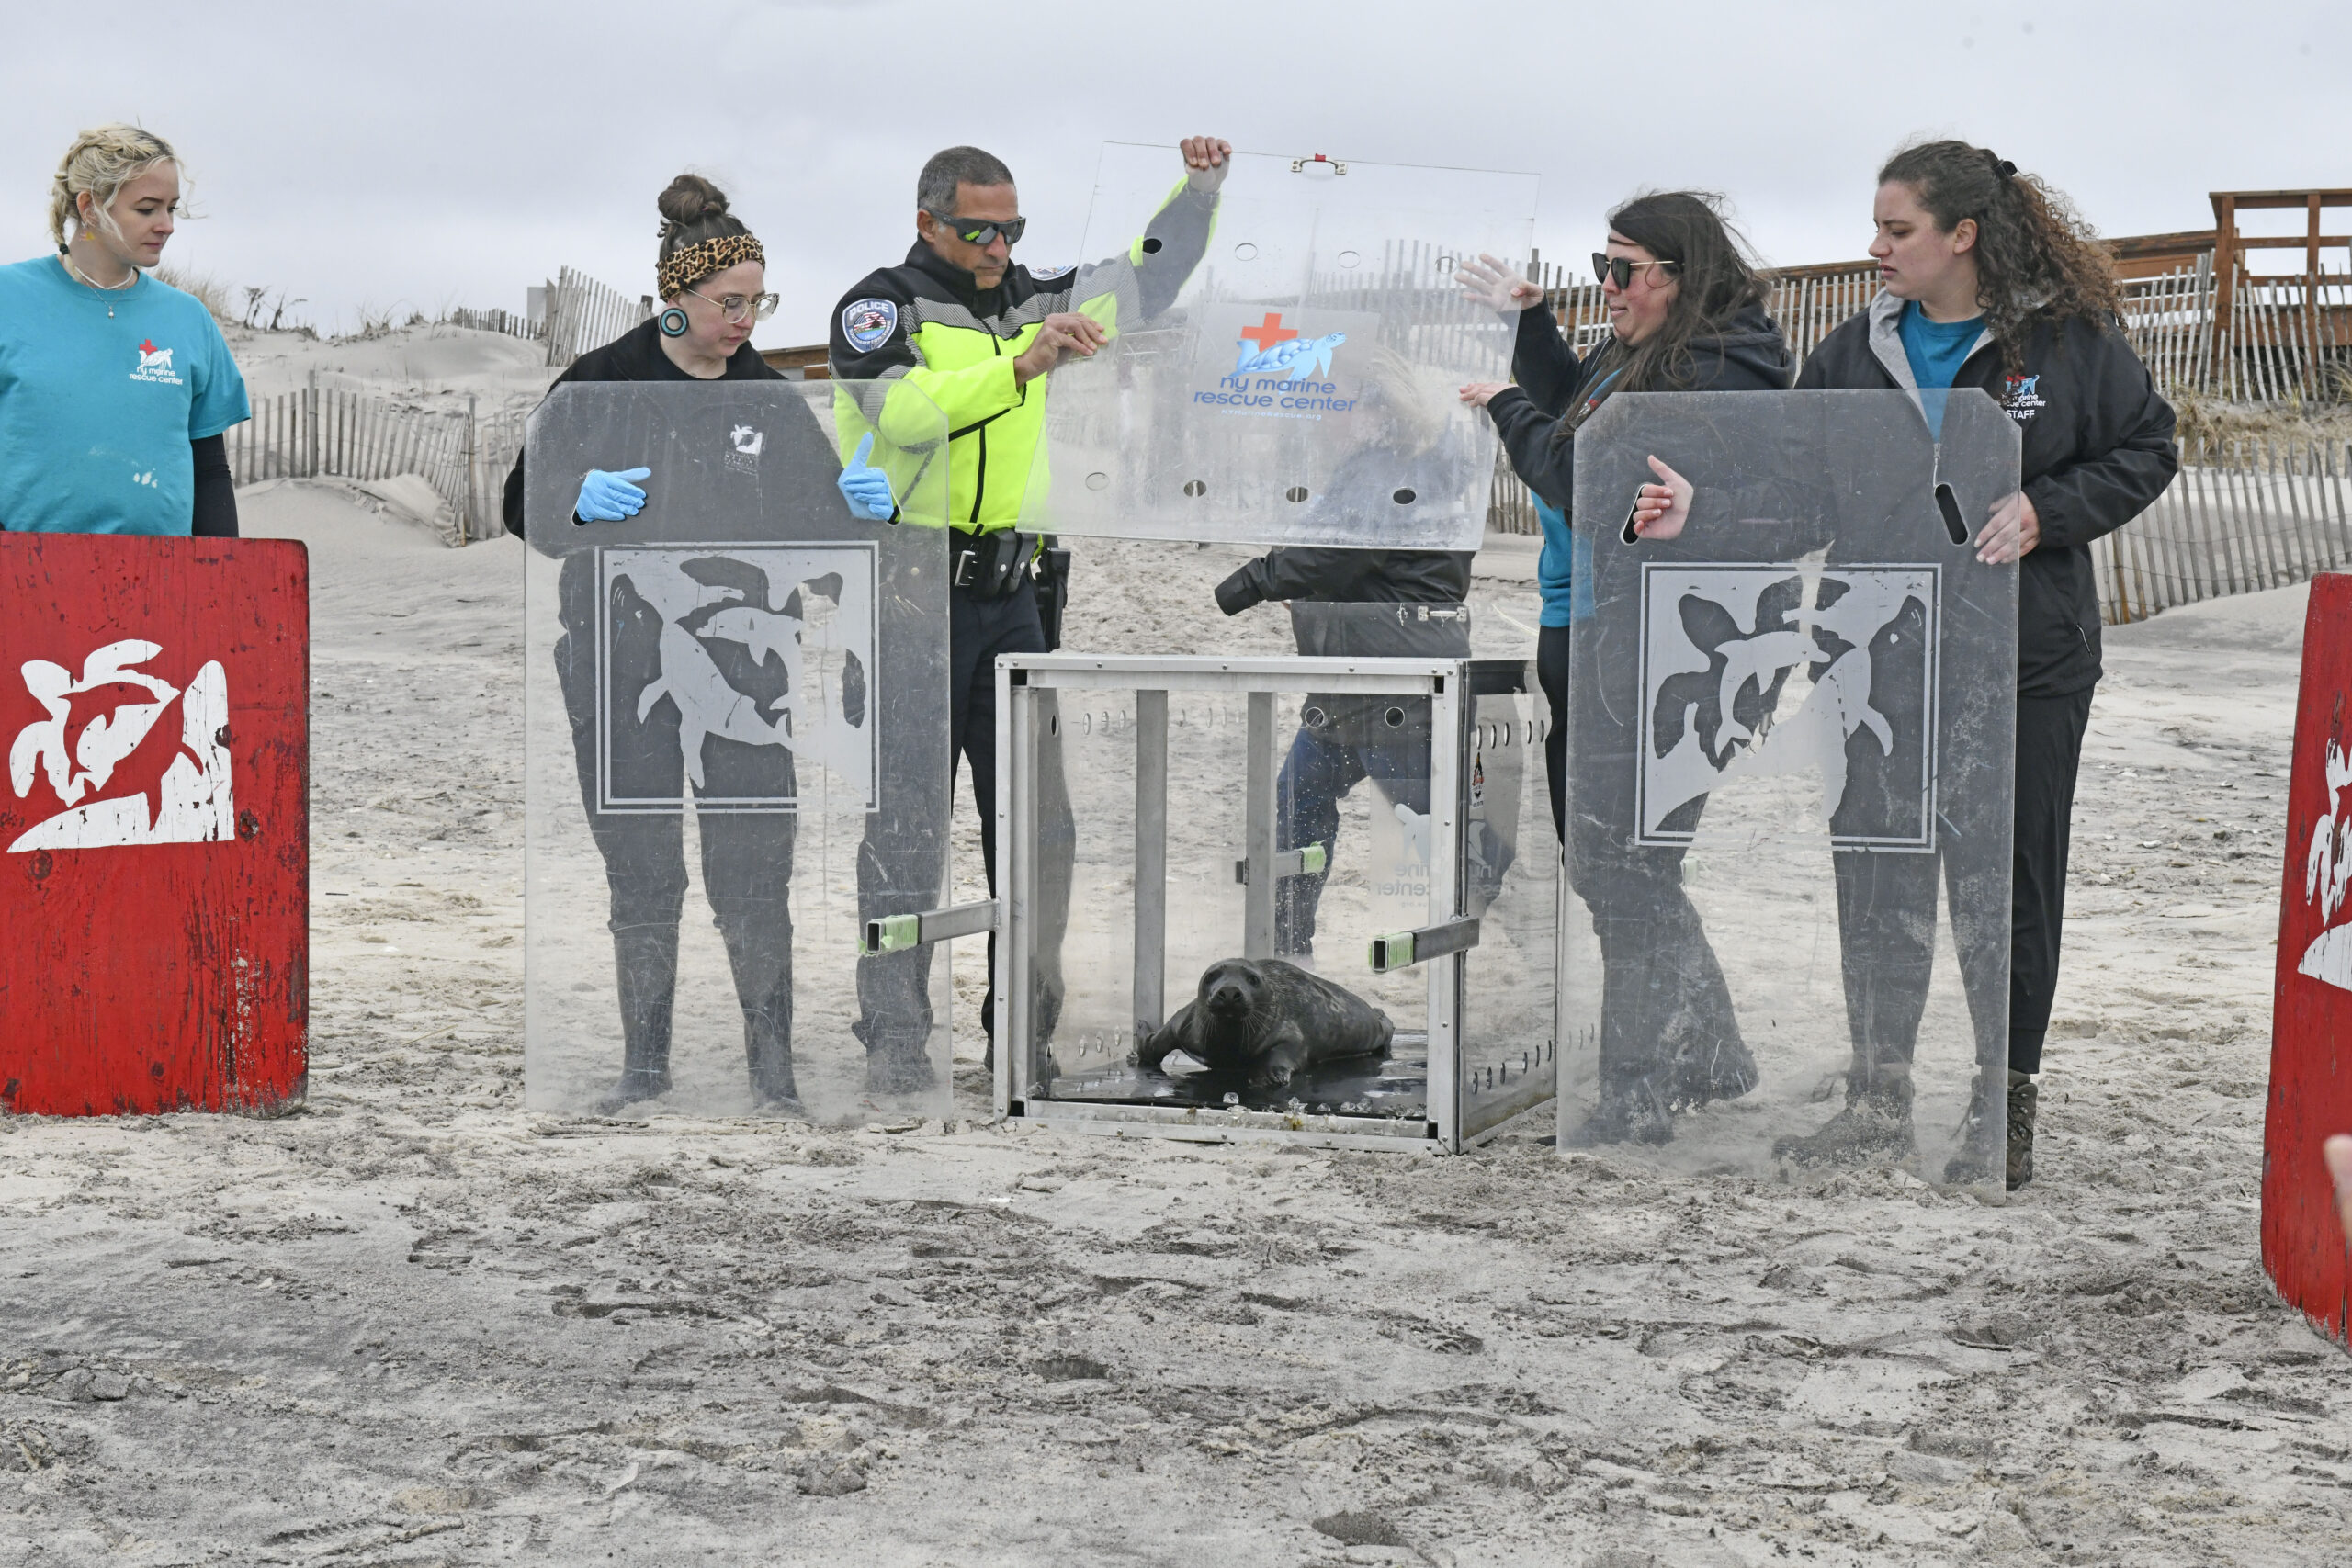 Peconic, the male gray seal pup found wandering near the traffic circle in Riverhead was released on Friday morning at Tiana Beach in Hampton Bays.